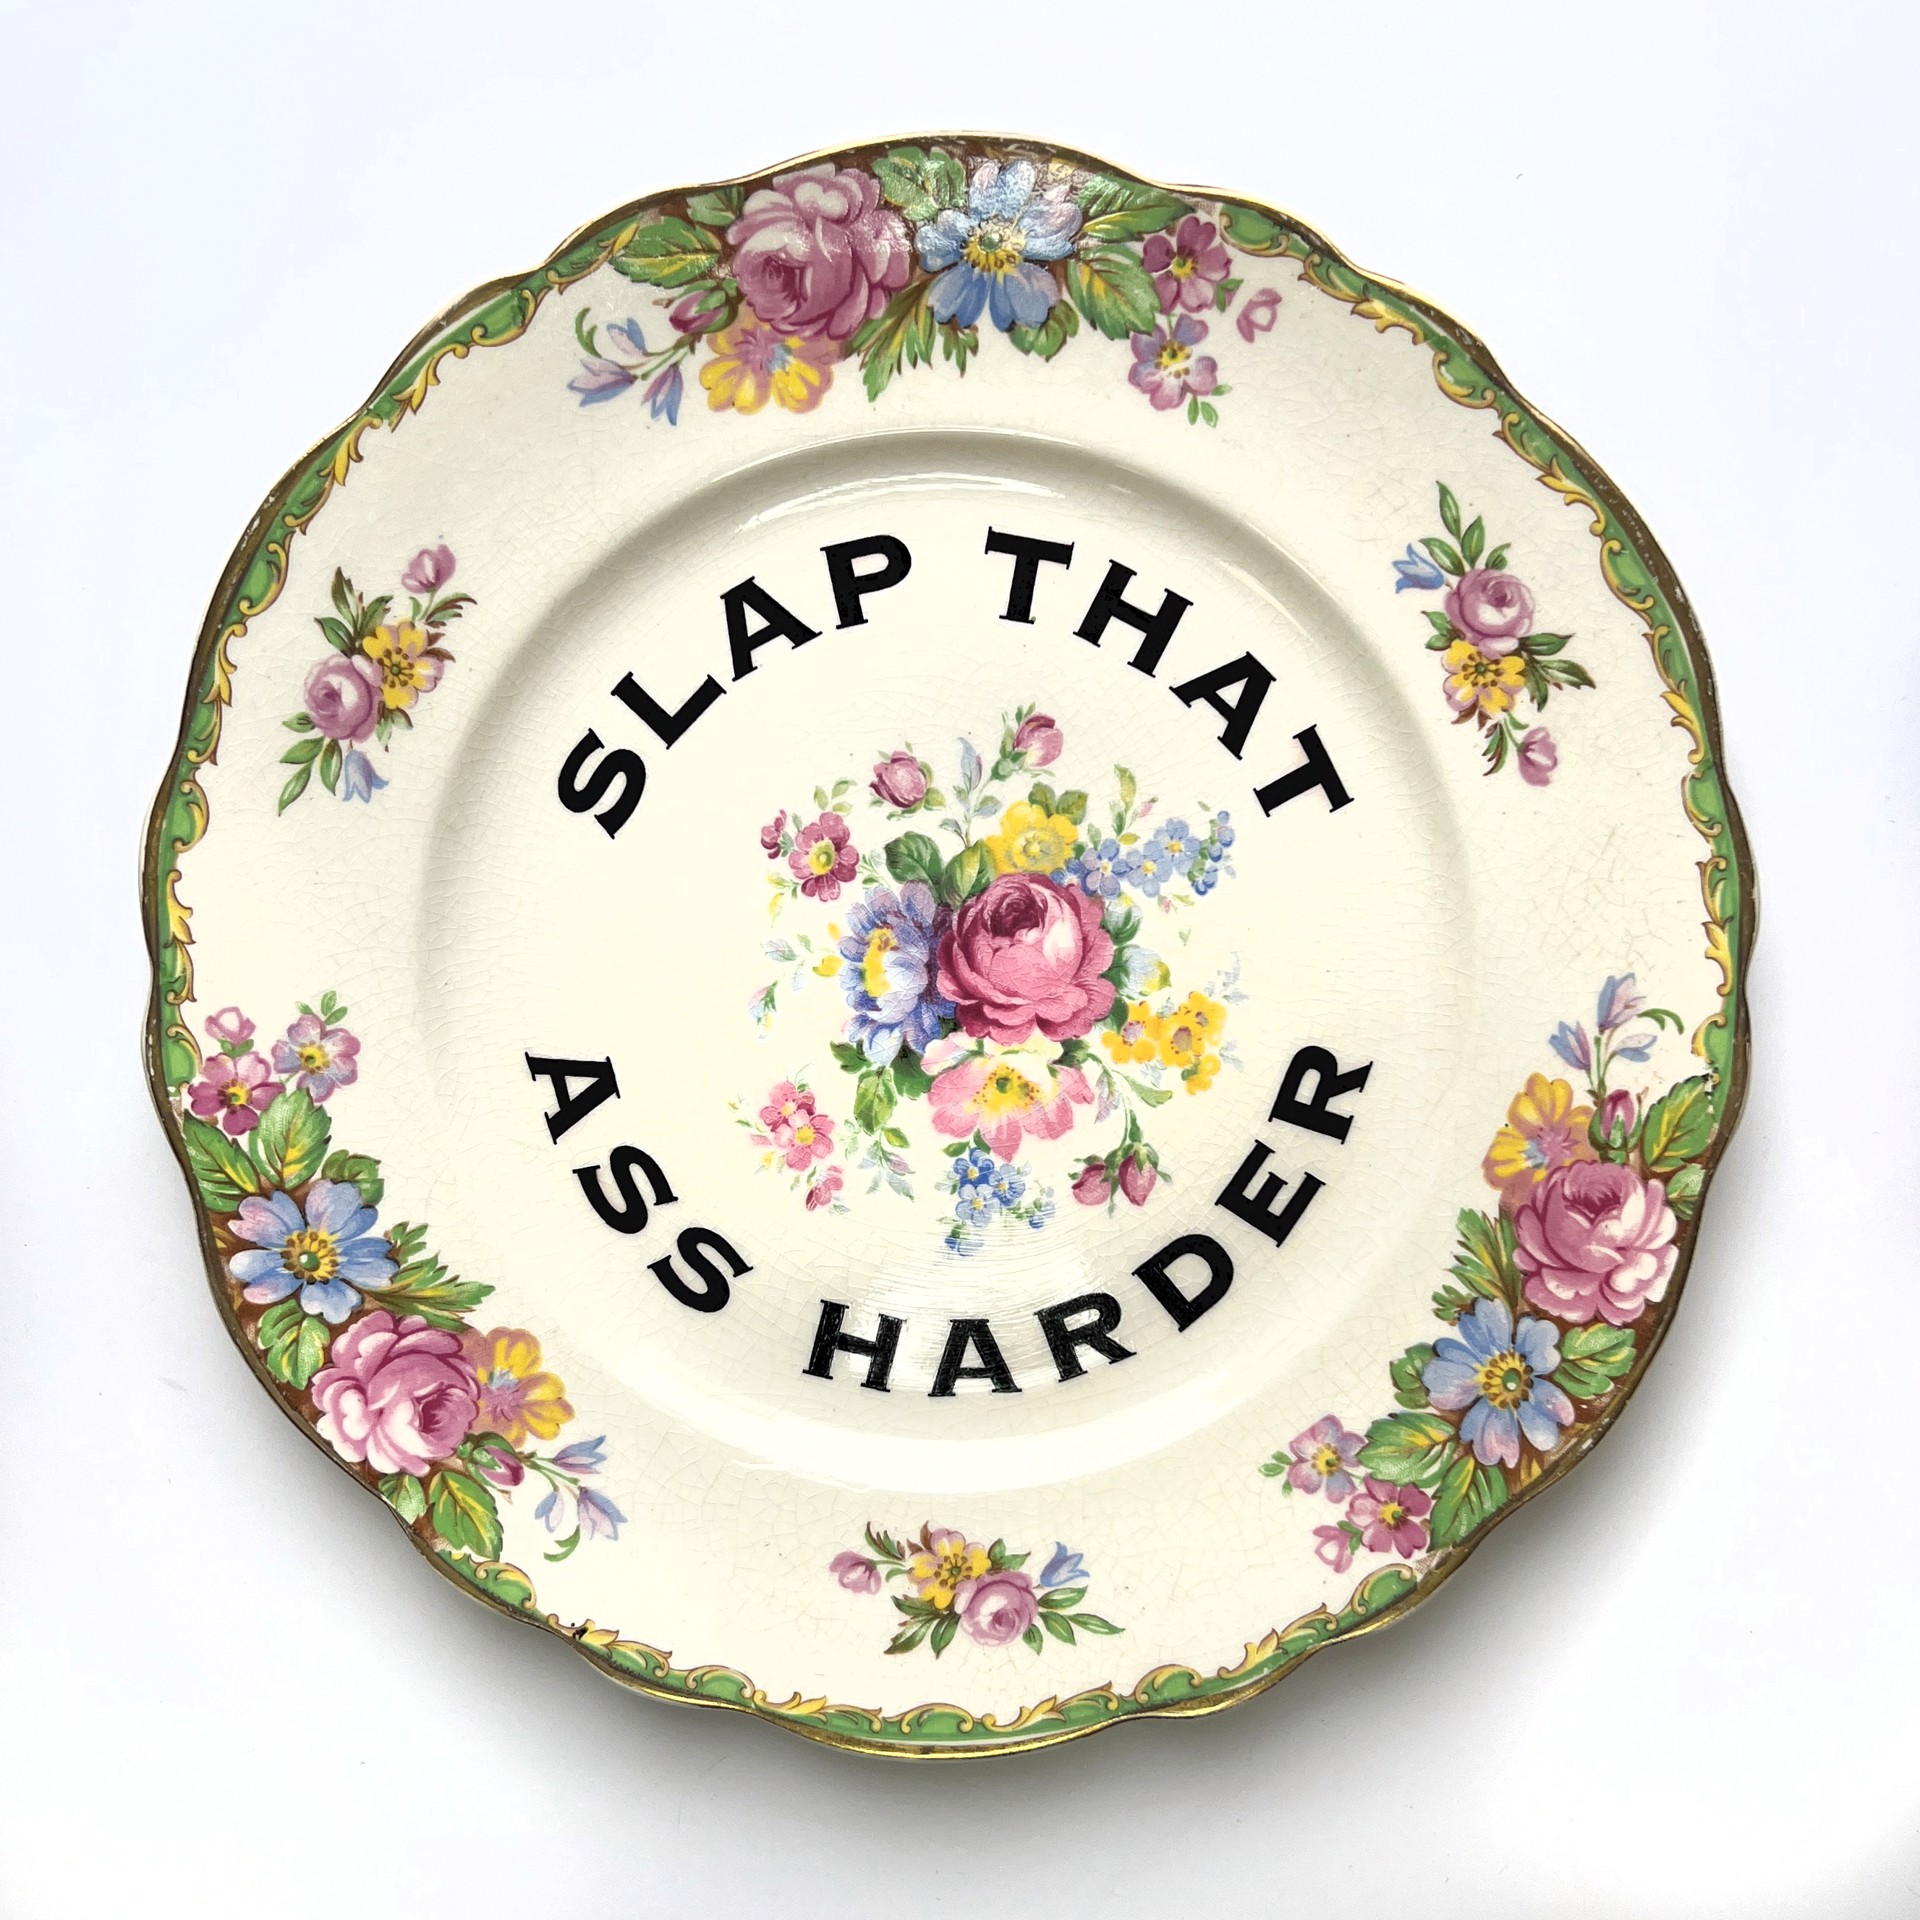 Slap that ass harder by Marie-Claude Marquis